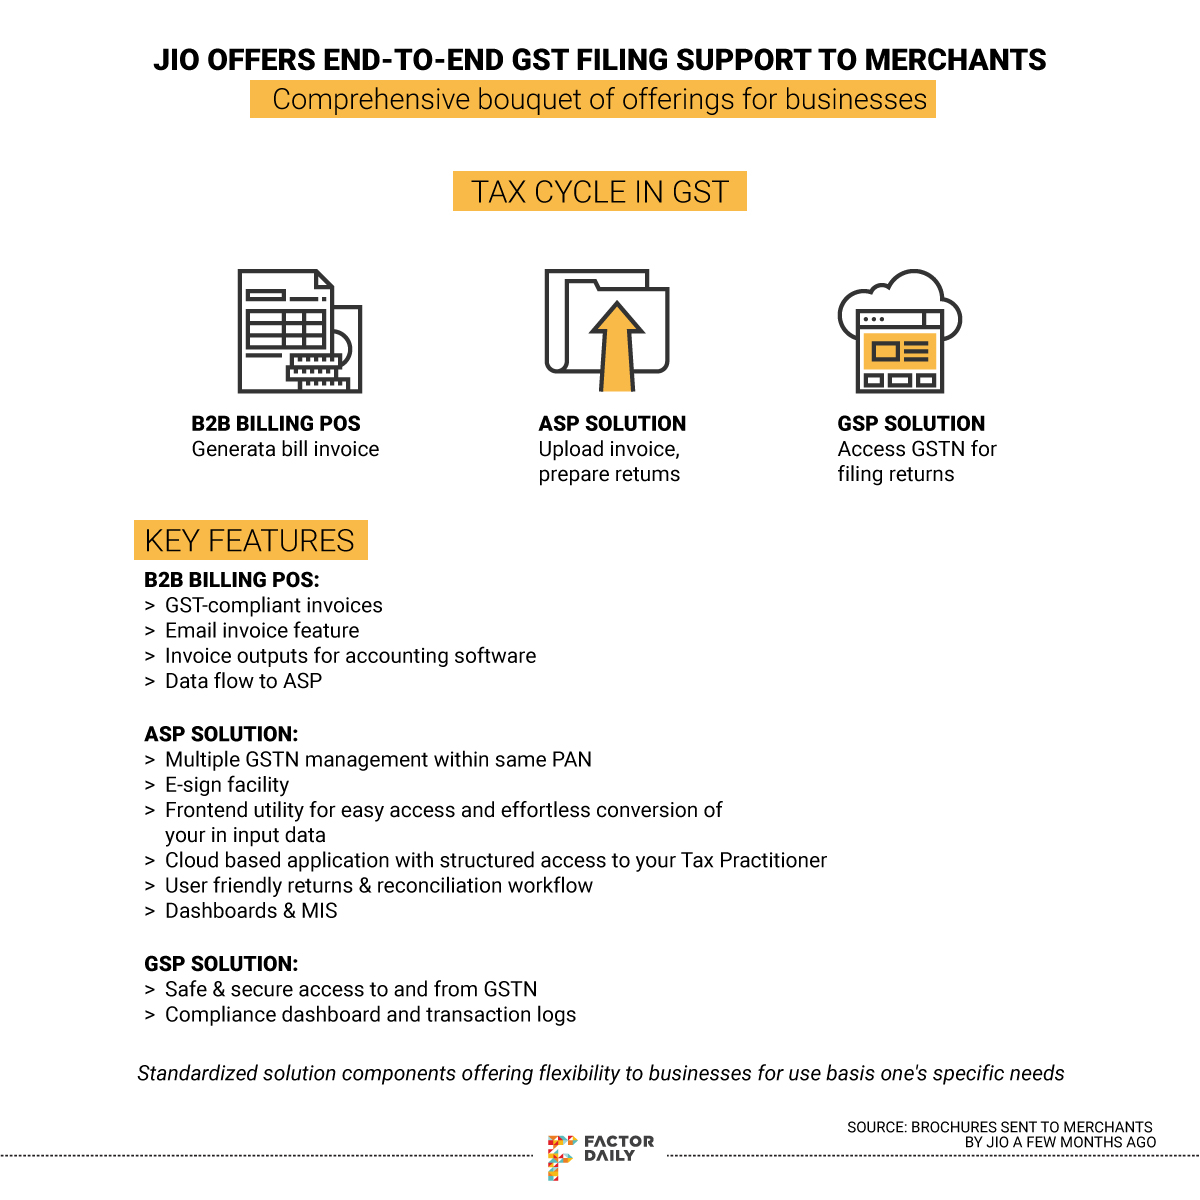 Visual with details on how Jio offers end-to-end support for GST filing to merchants